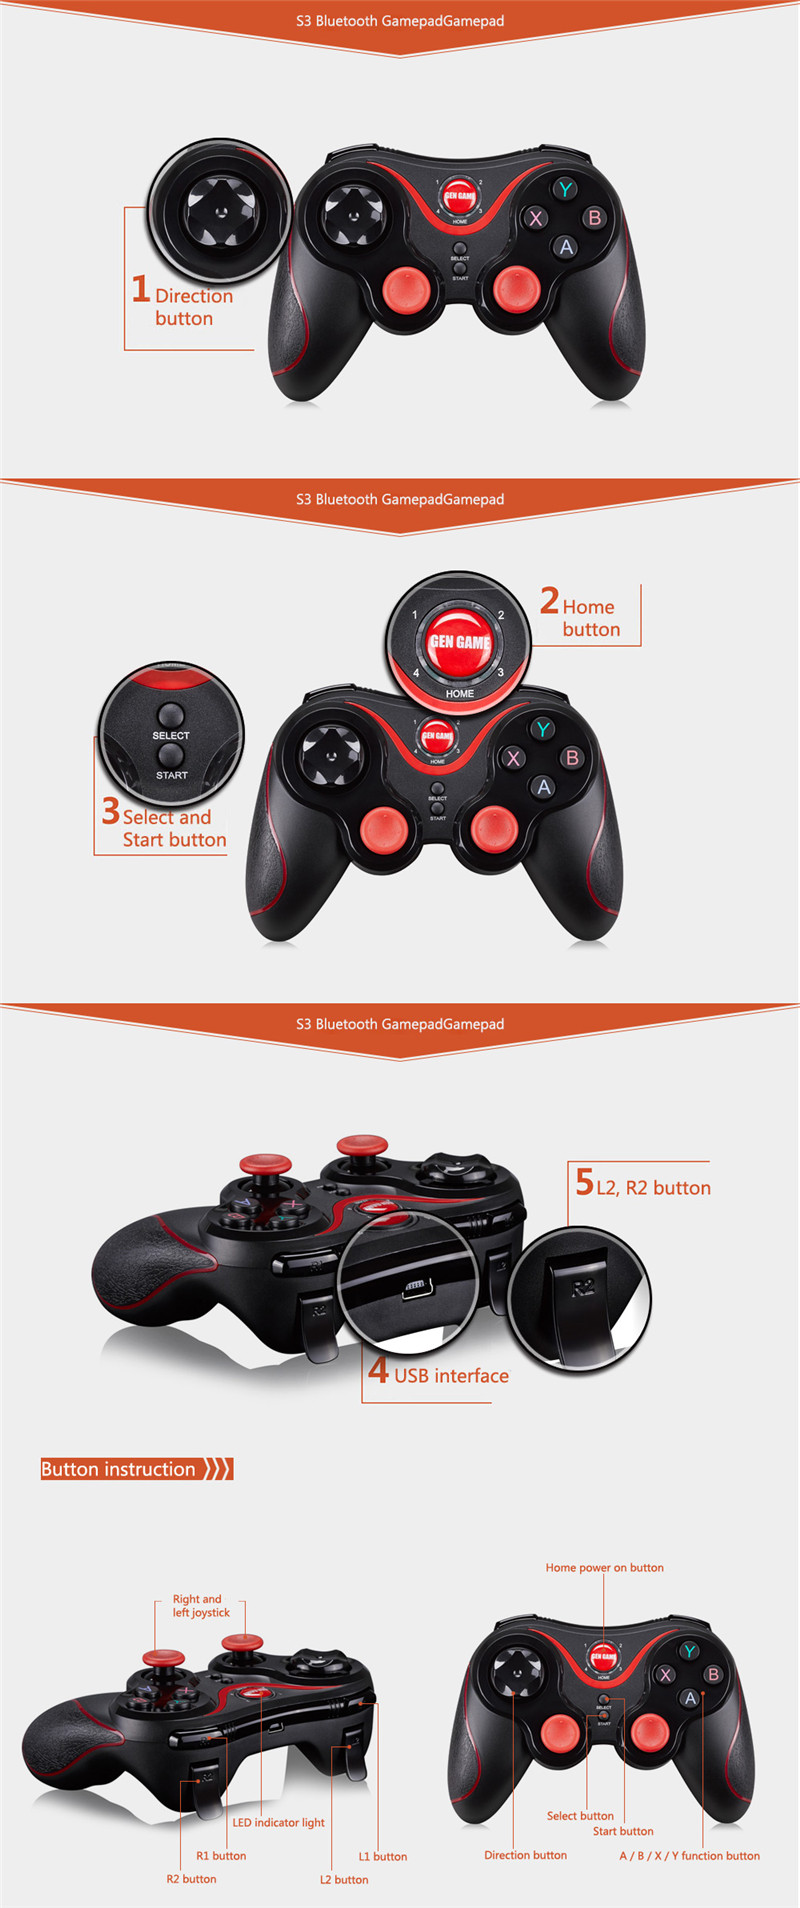 GEN GAME S3 Bluetooth 3.0 Gamepad Gaming Controller PC Android